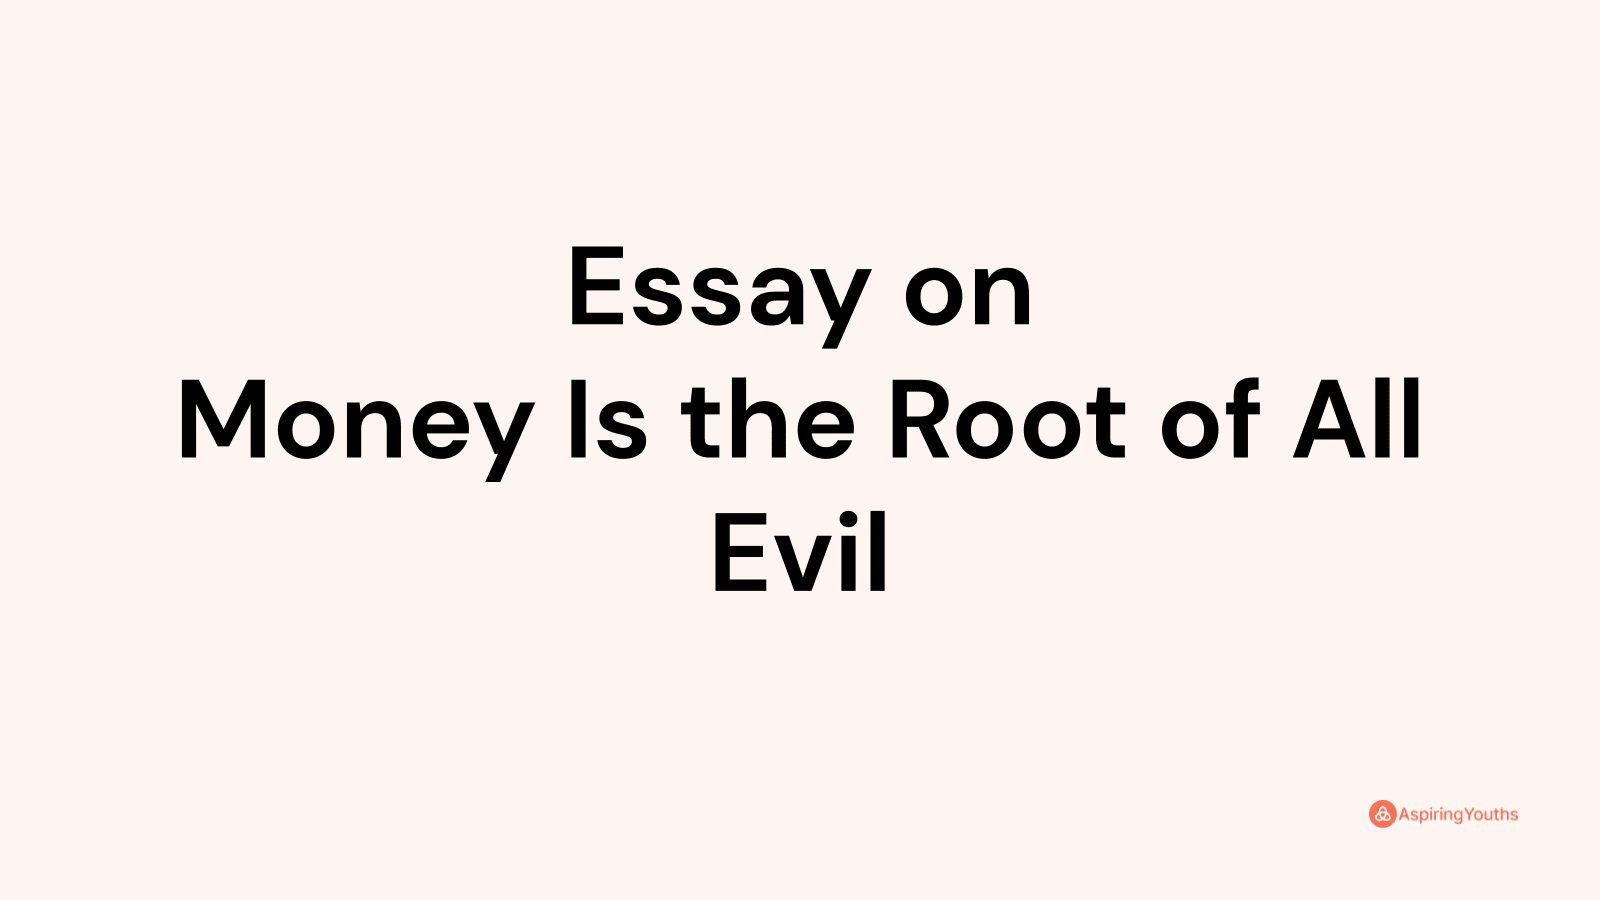 Essay on Money Is the Root of All Evil